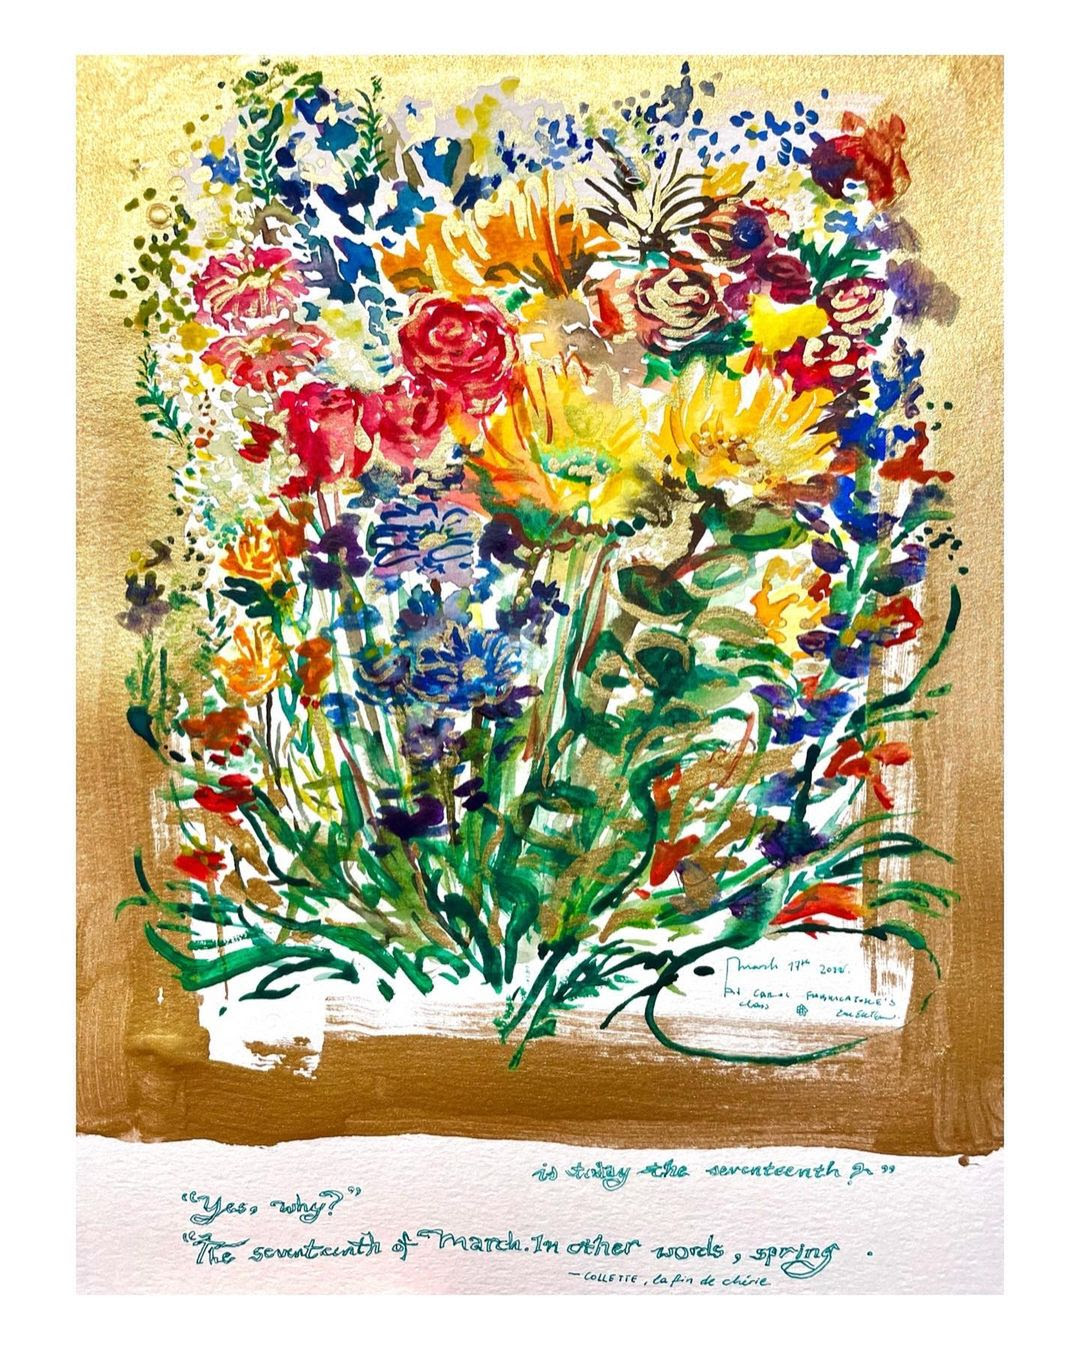 Watercolor painting of a flower bouquet in all colors, featuring a variety of flowers, framed by a painted gold border.